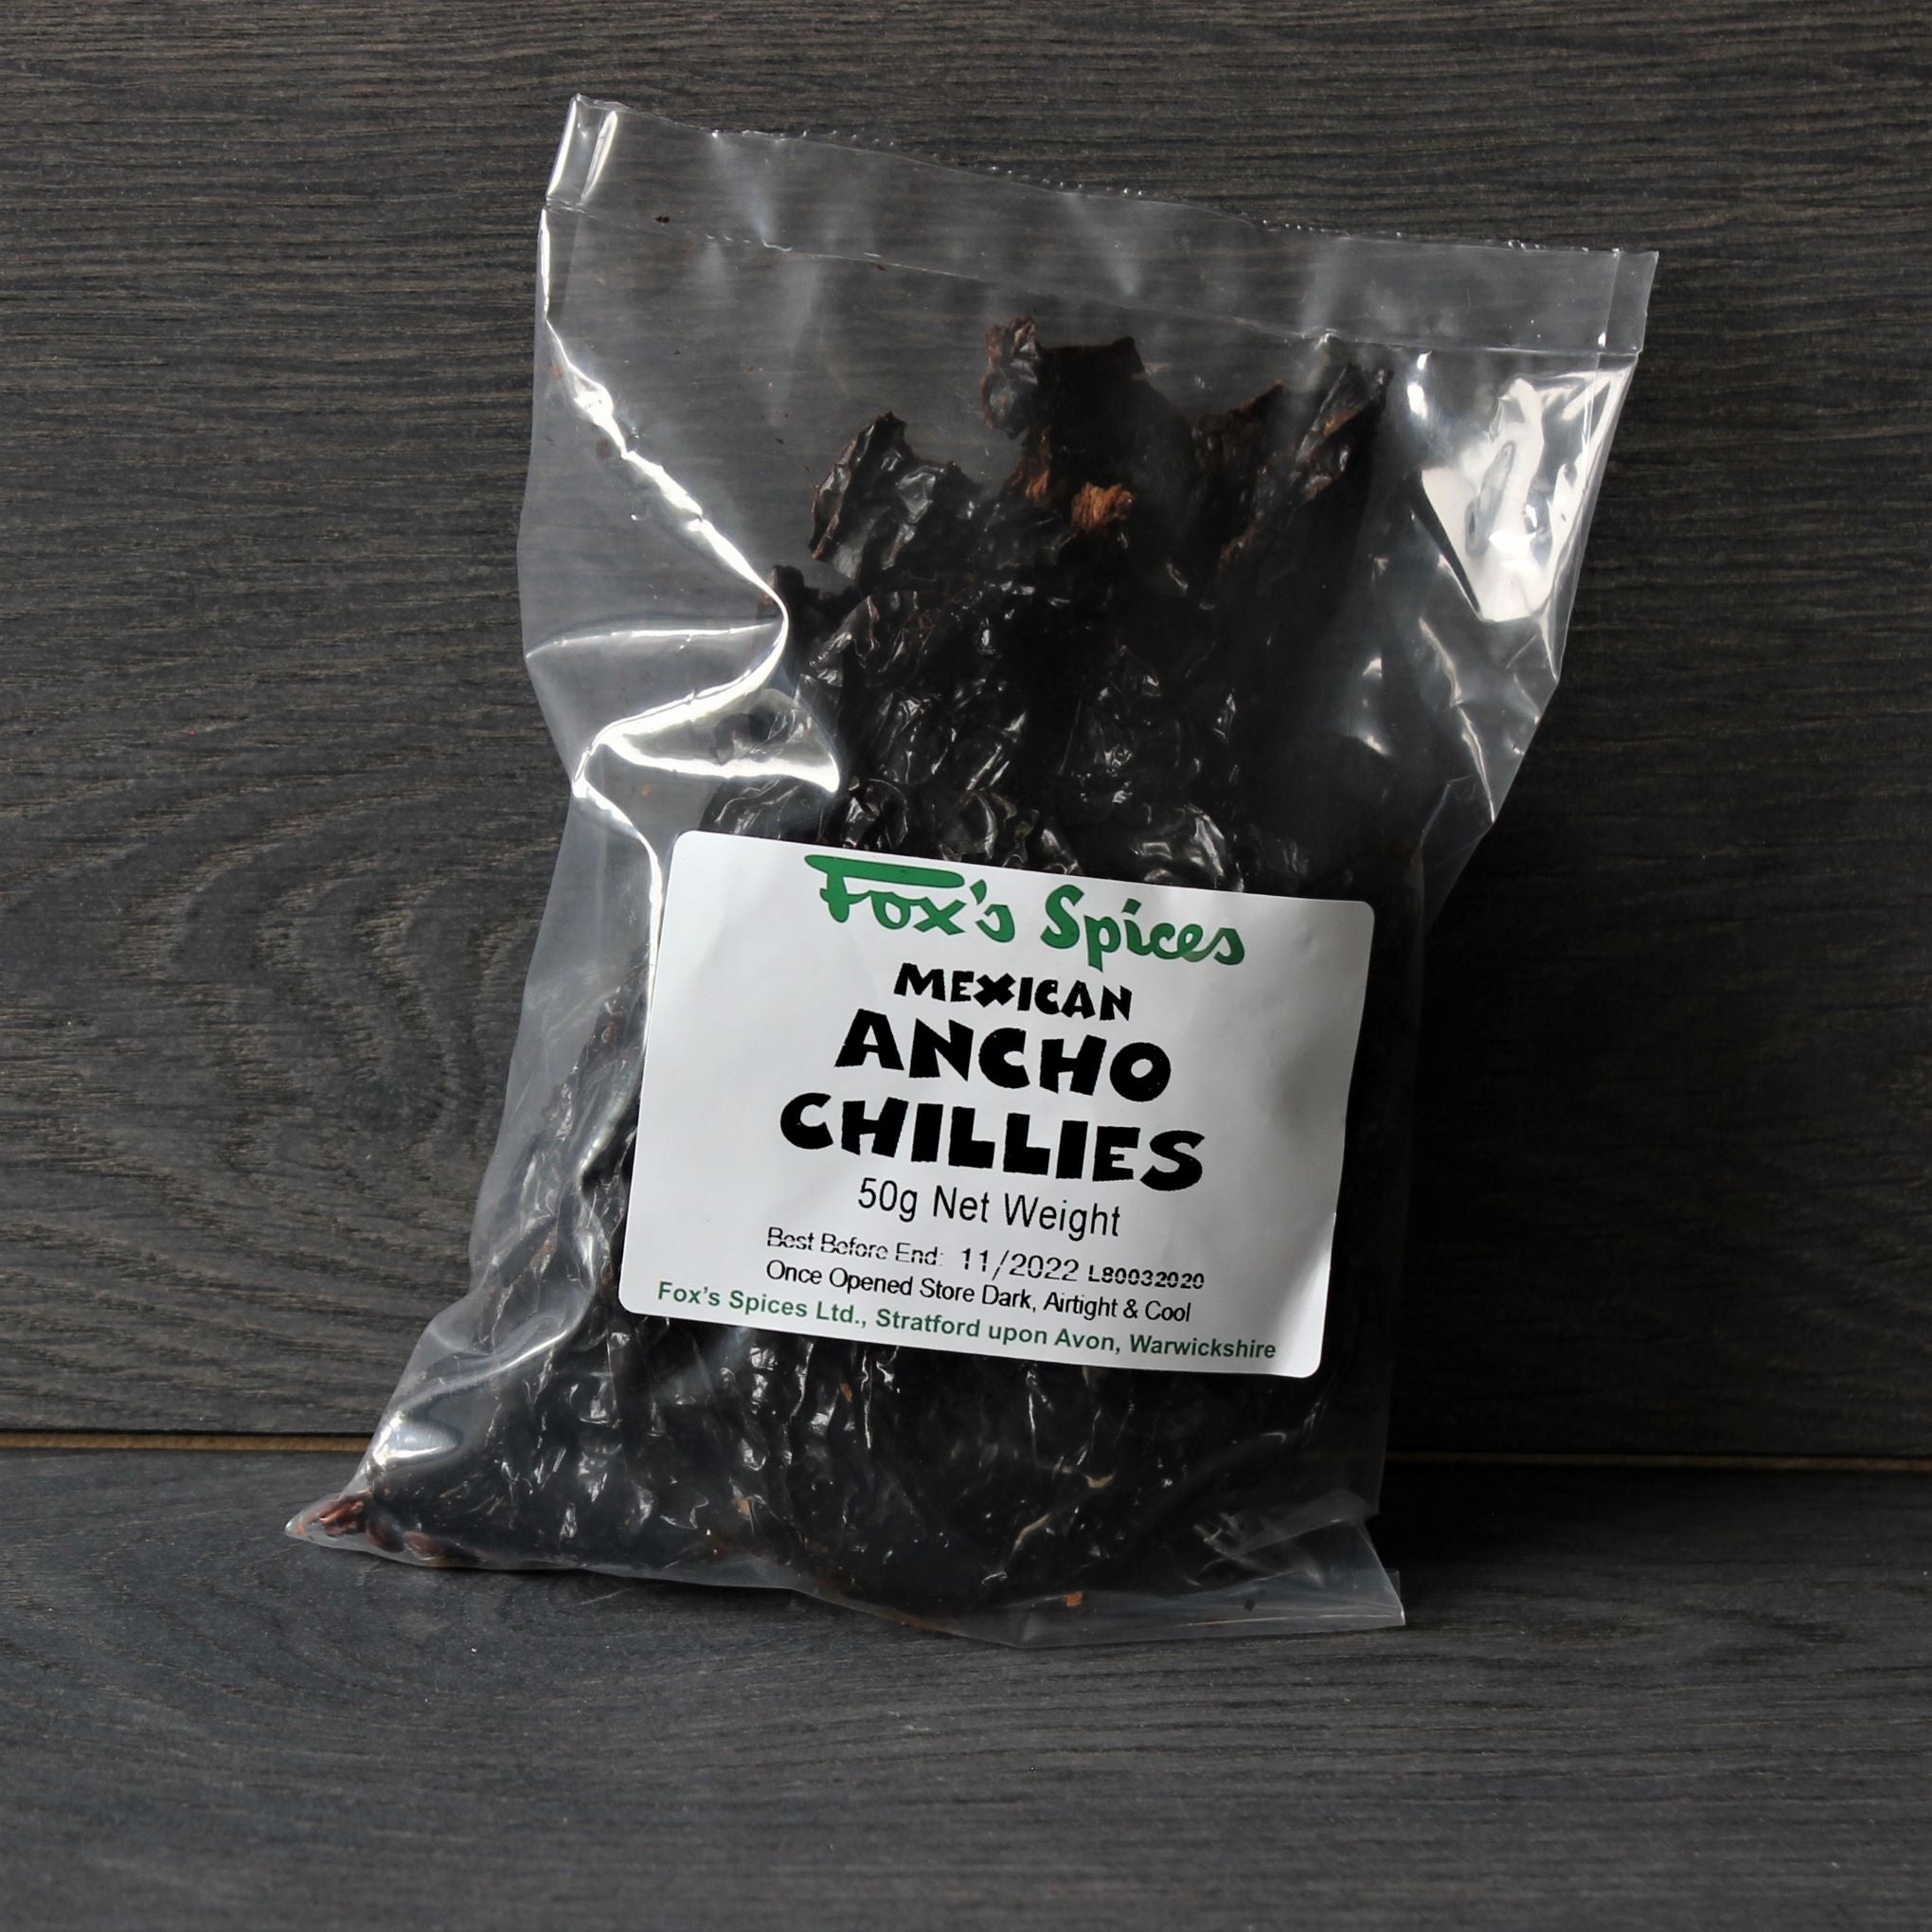 A 50g bag of Mexican Ancho Dried Chillies from Fox's Spices